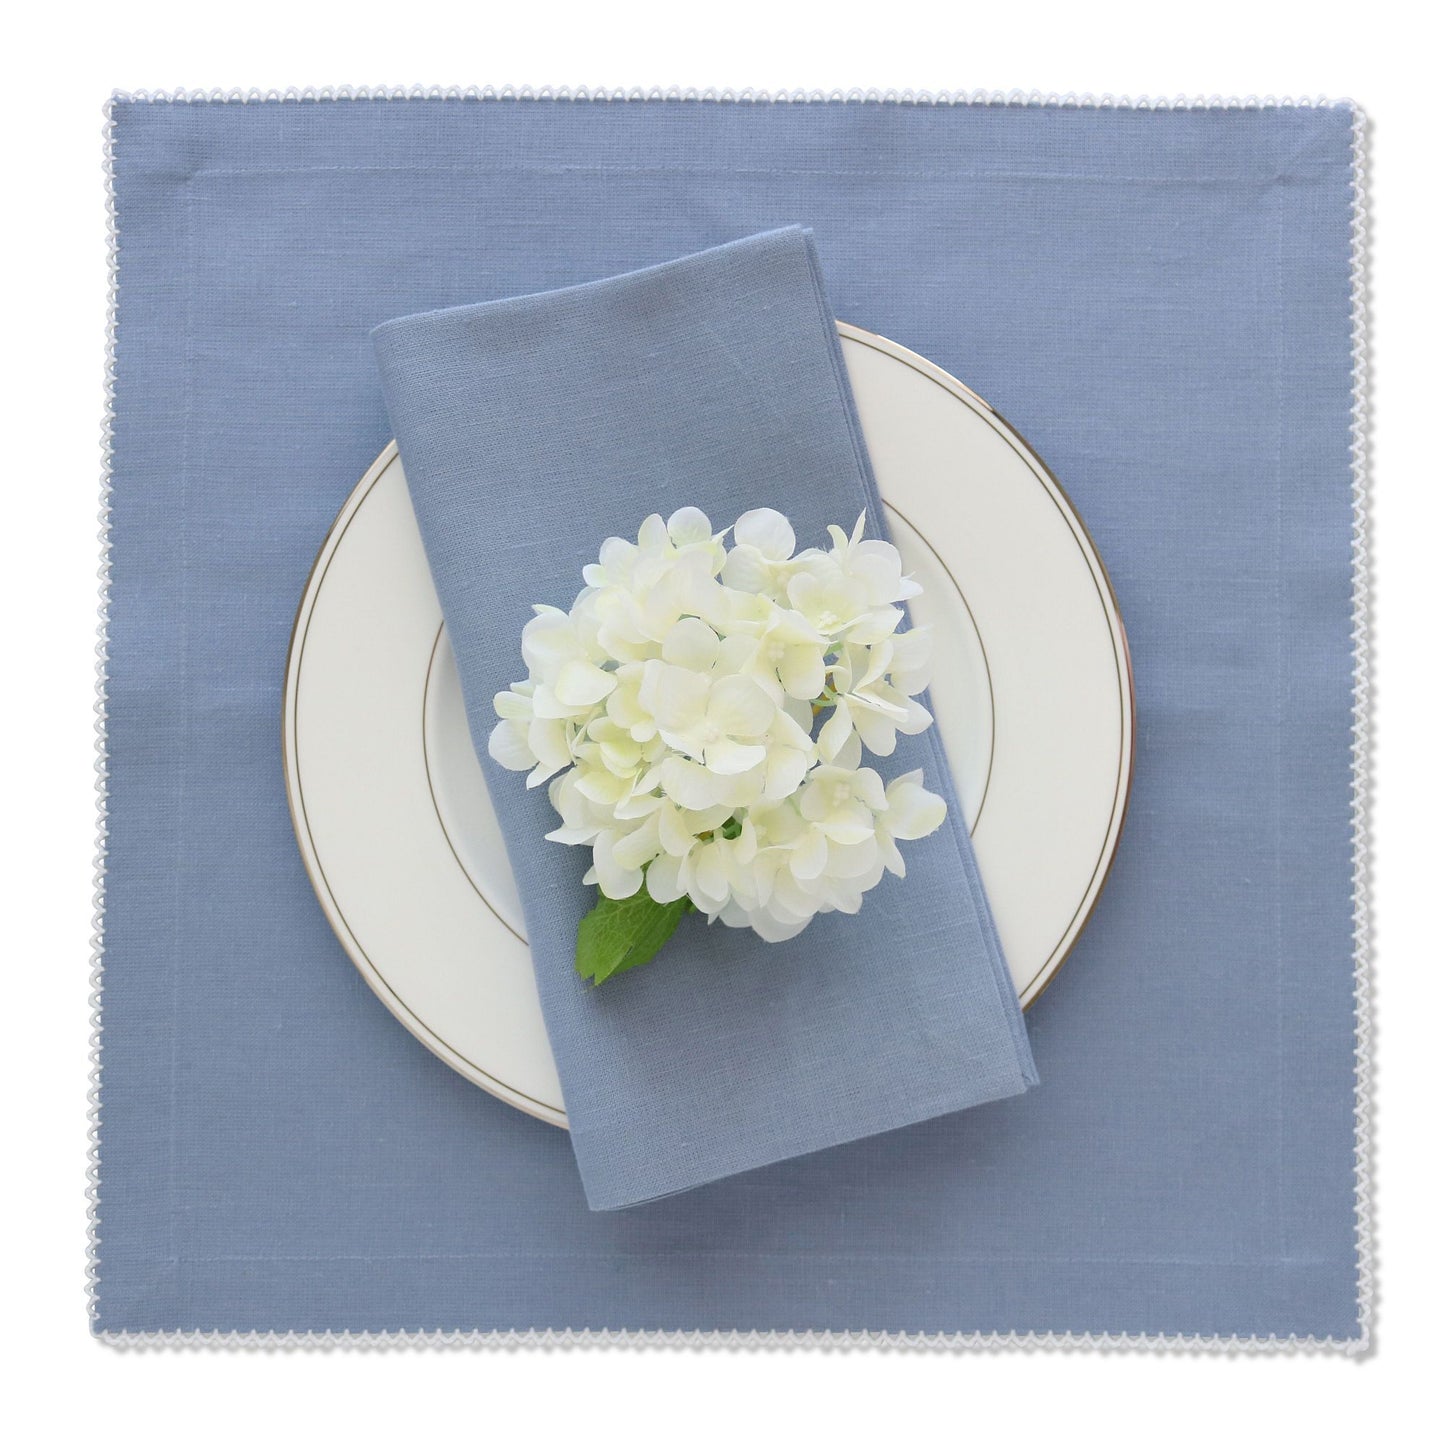 Made to order linen picot trim placemats (set of 4)